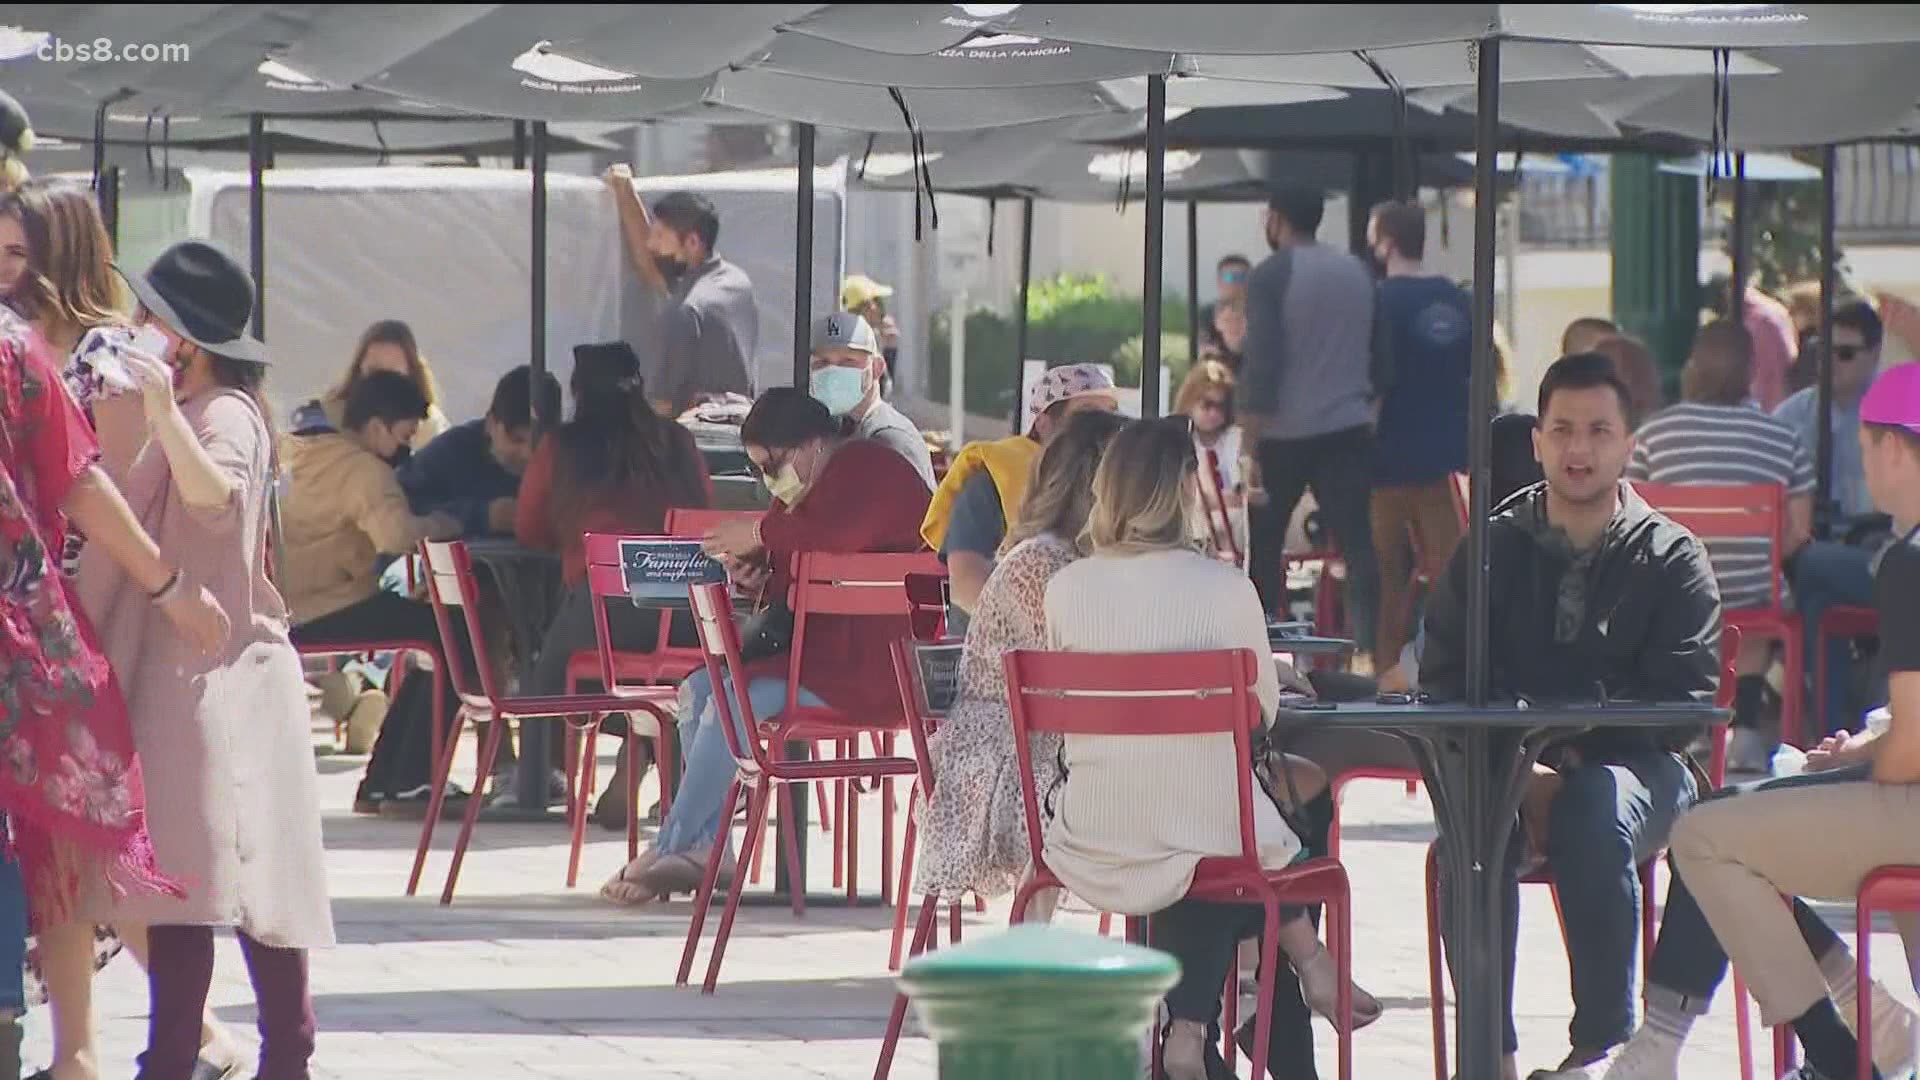 The outdoor dining permits now expire in July 2022.